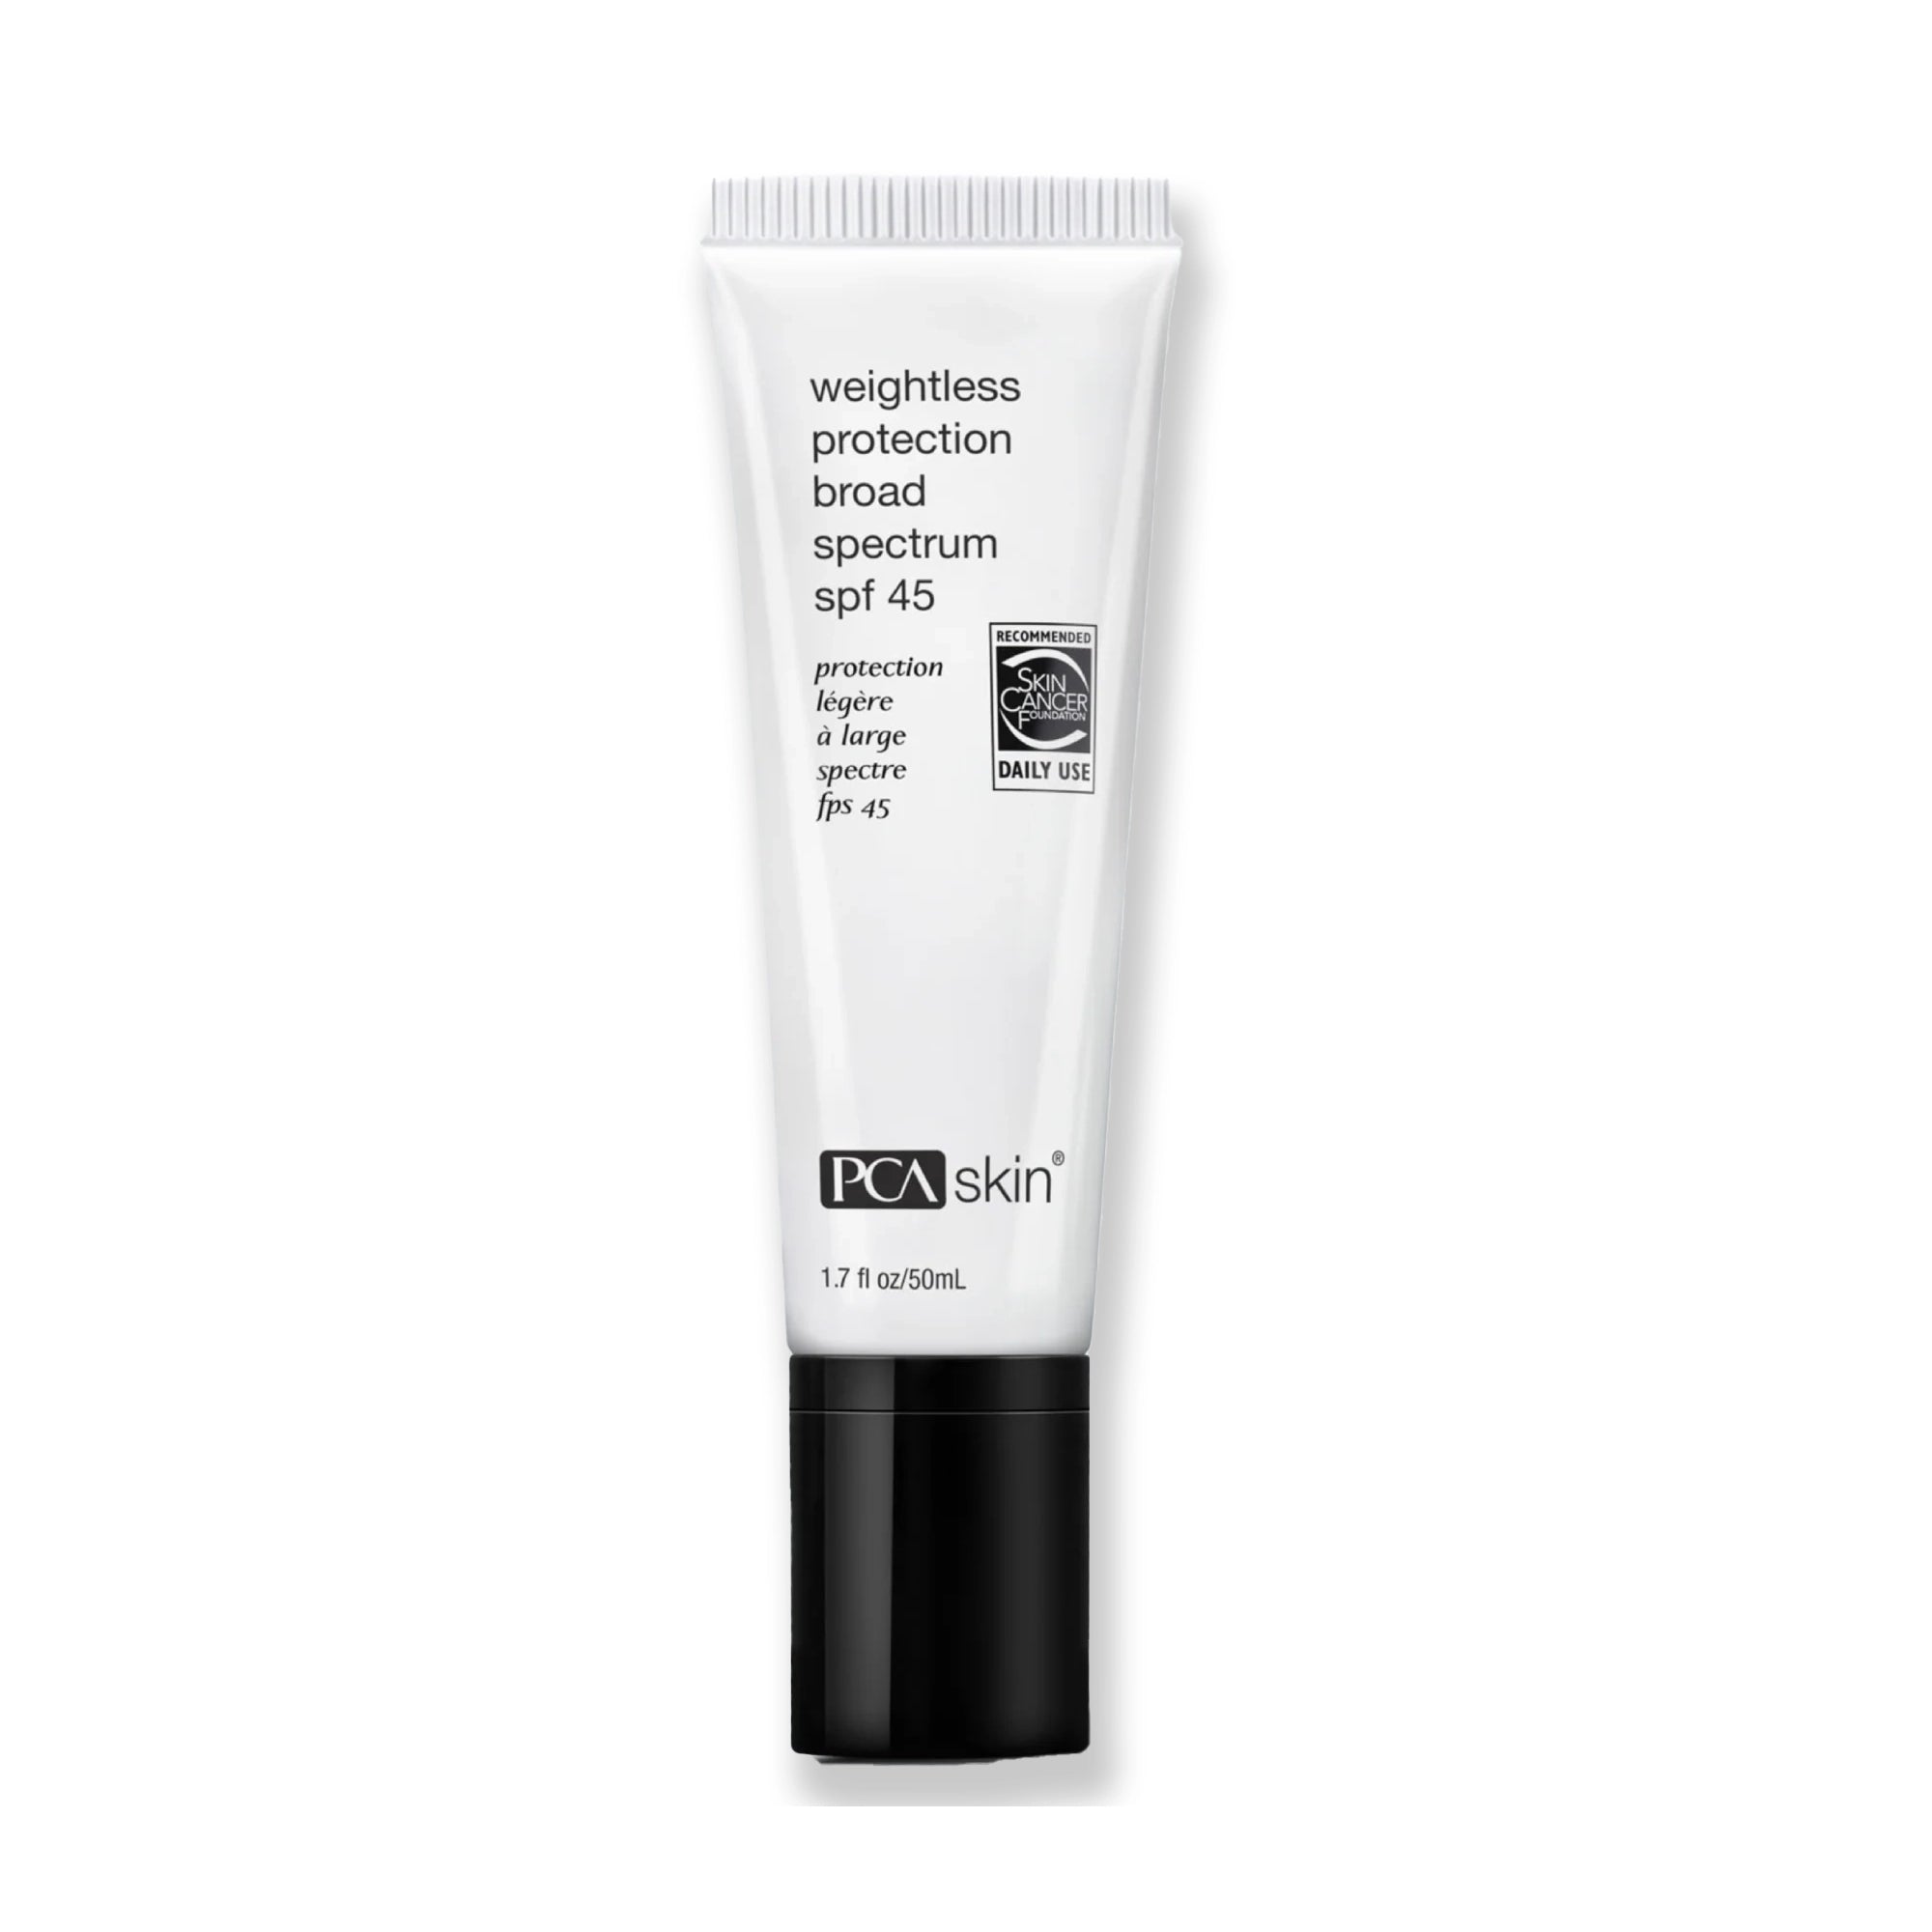 PCA SKIN Weightless Protection SPF45 / 2.1OZ